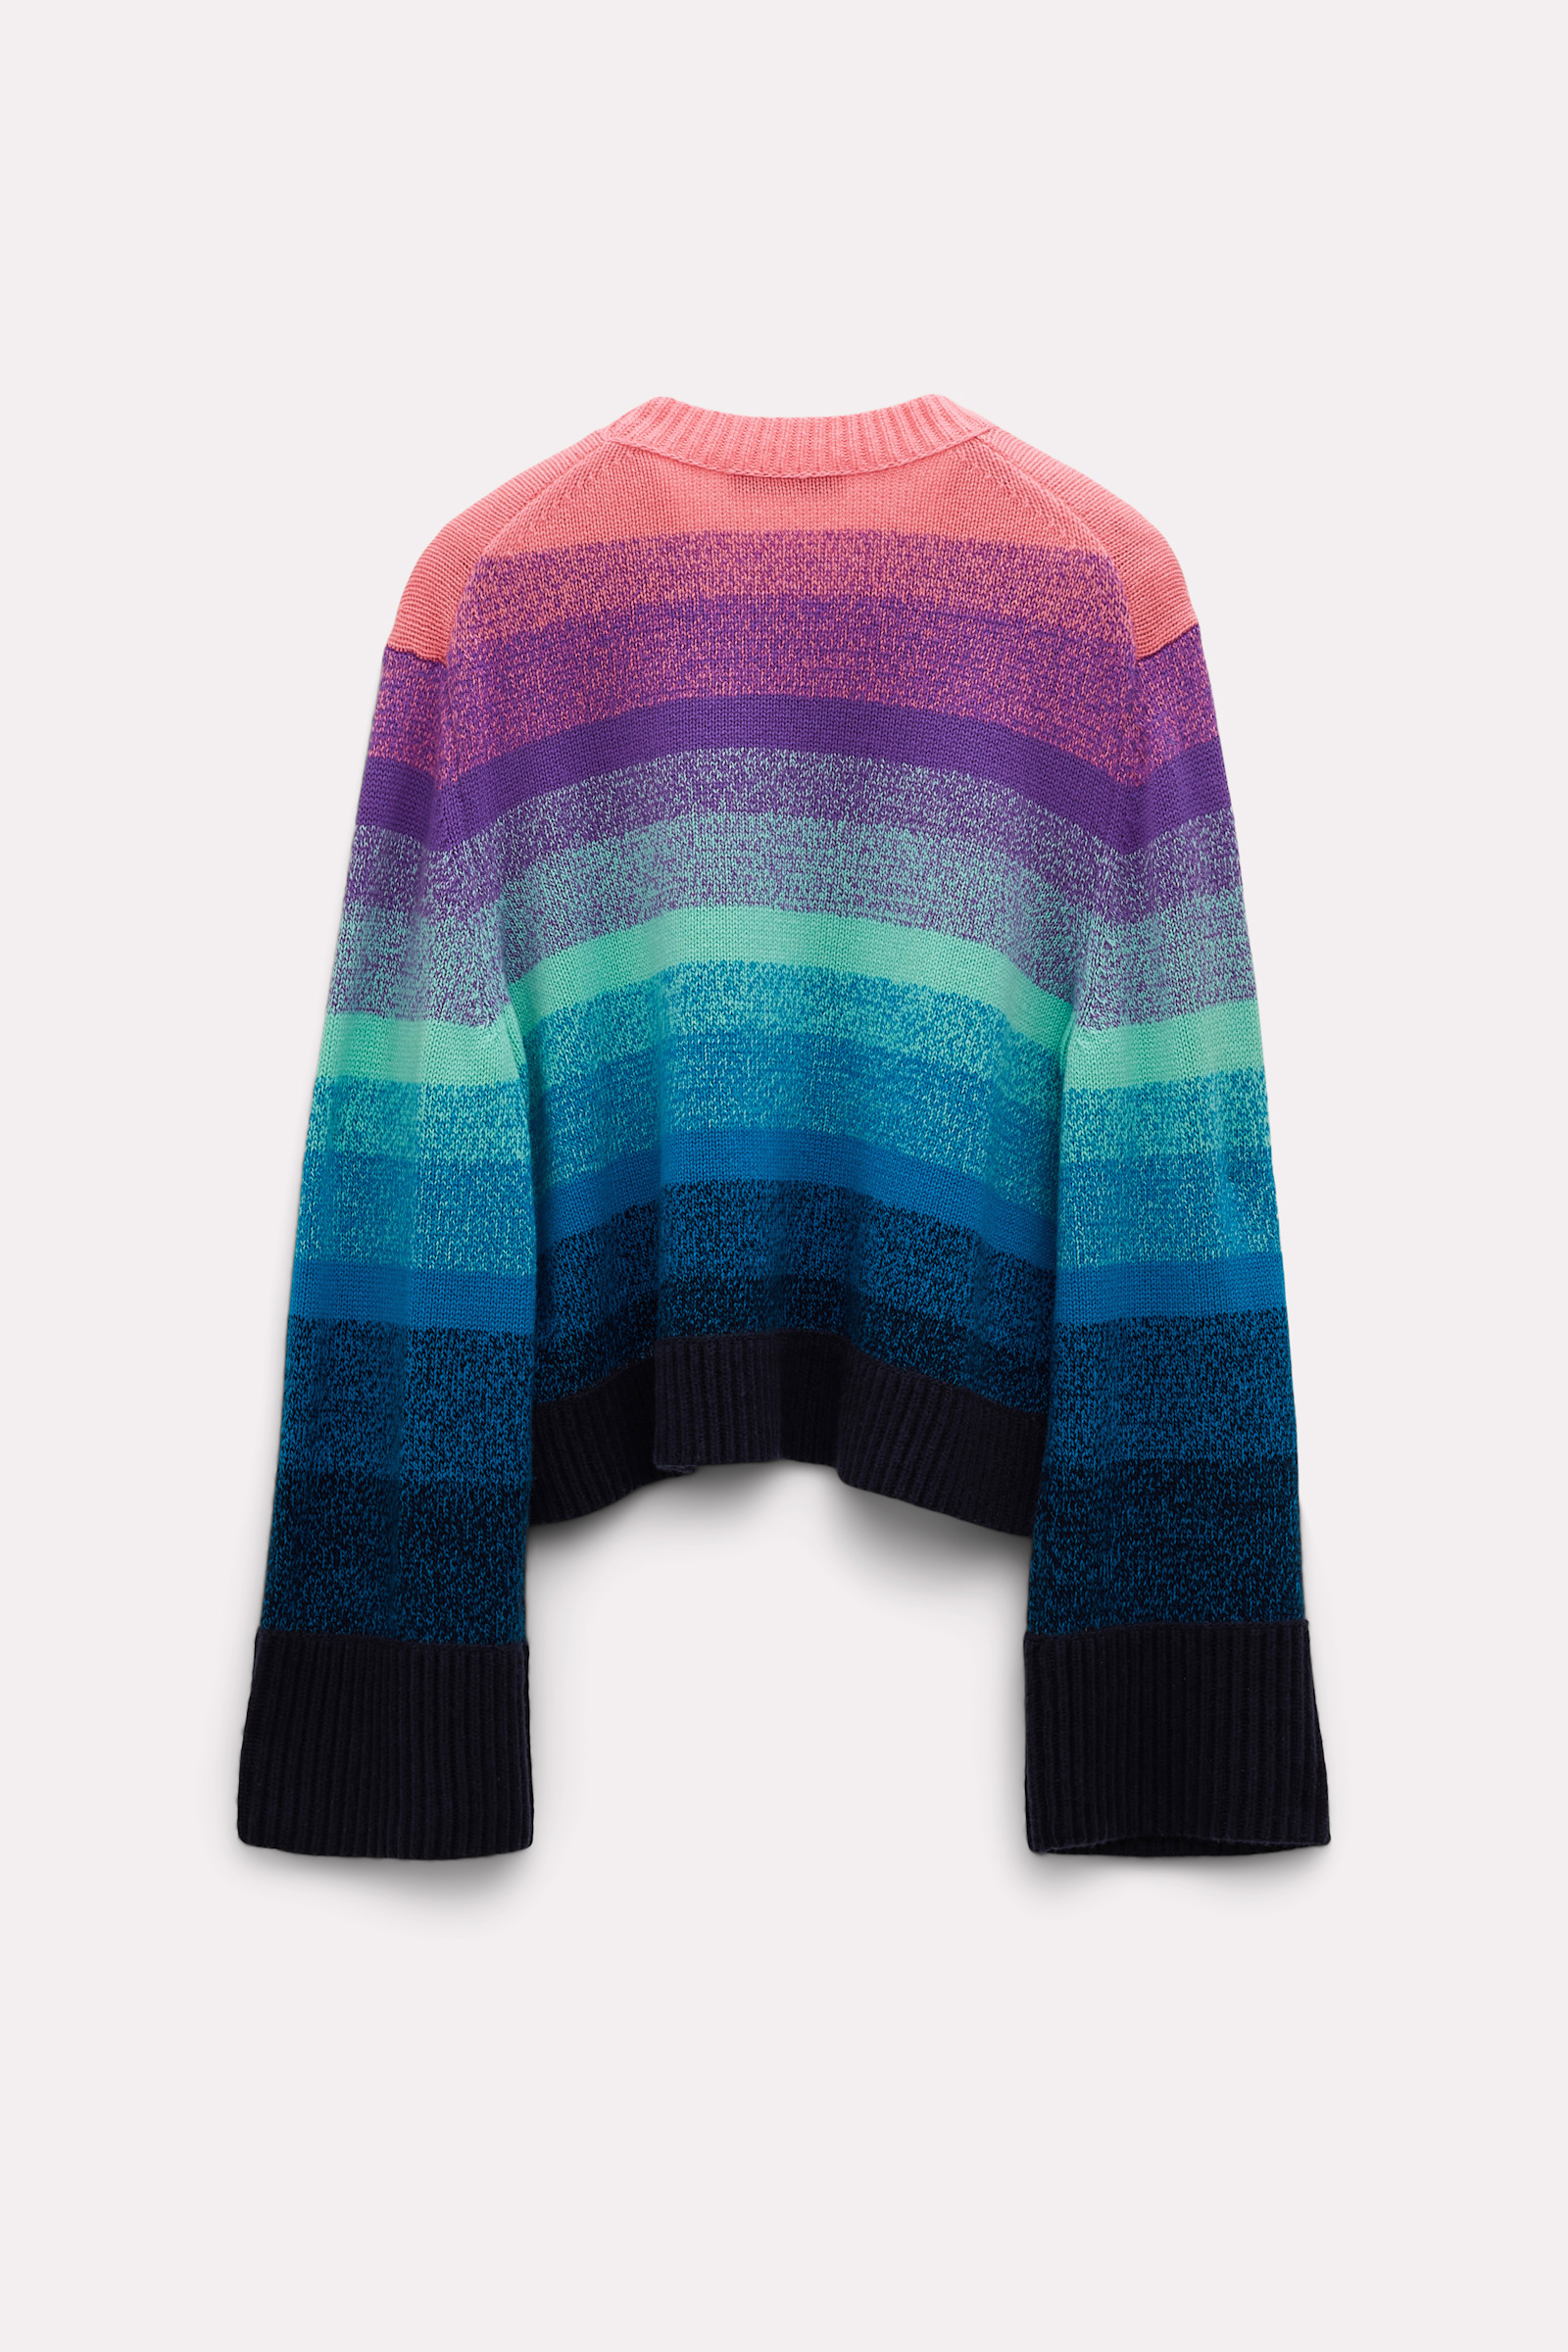 CHROMATIC STATEMENTS pullover